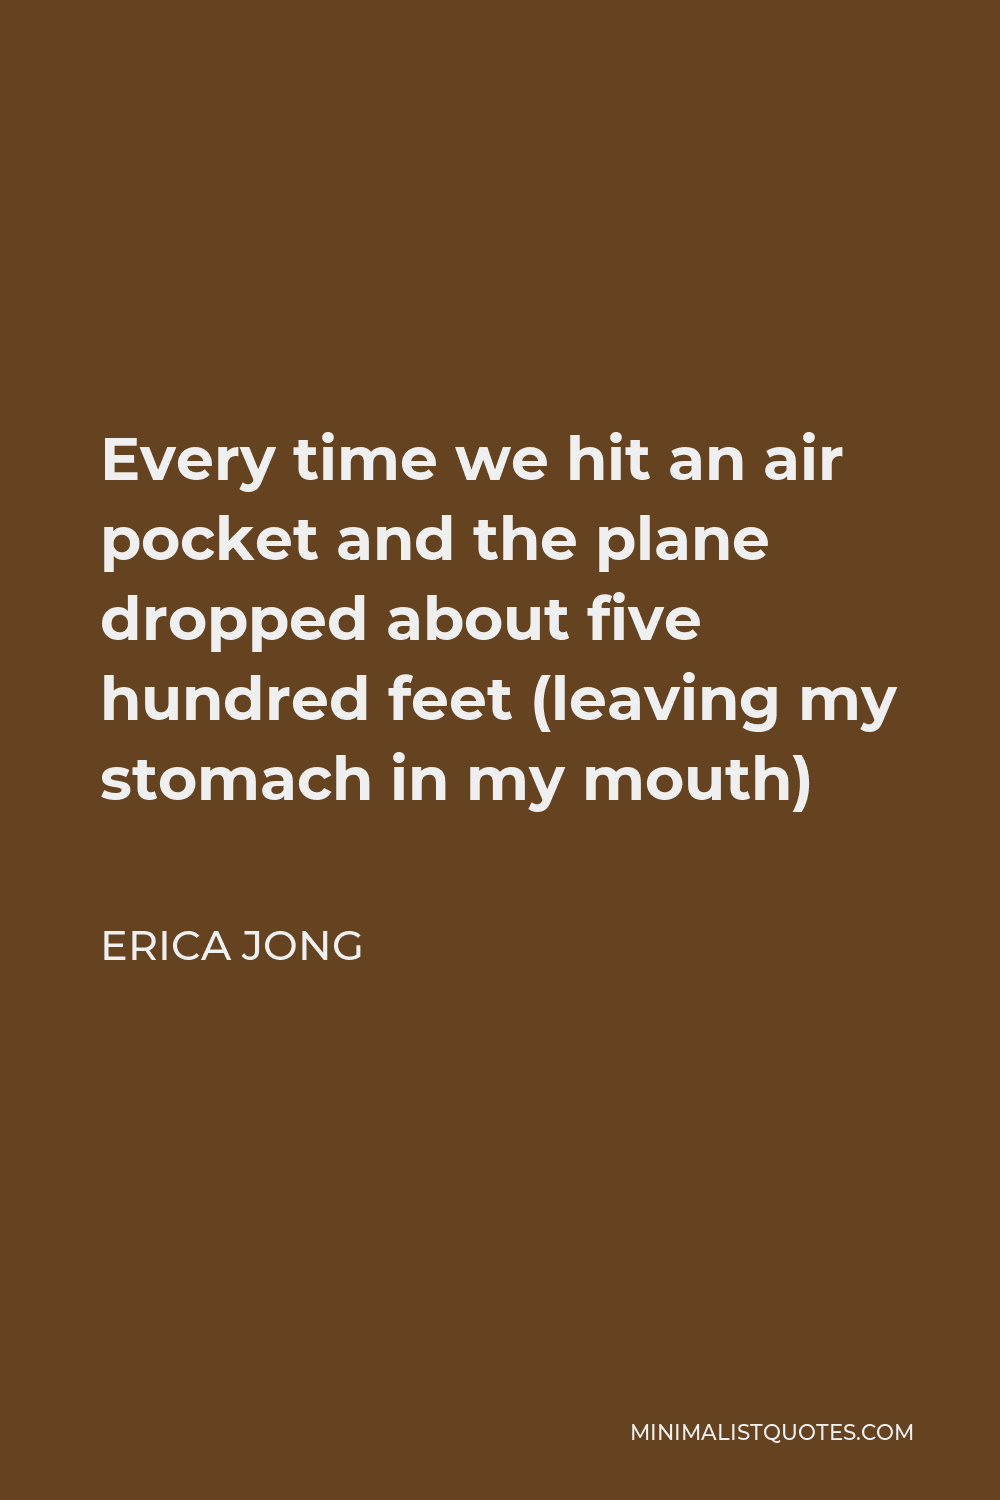 Erica Jong Quote - Every time we hit an air pocket and the plane dropped about five hundred feet (leaving my stomach in my mouth)